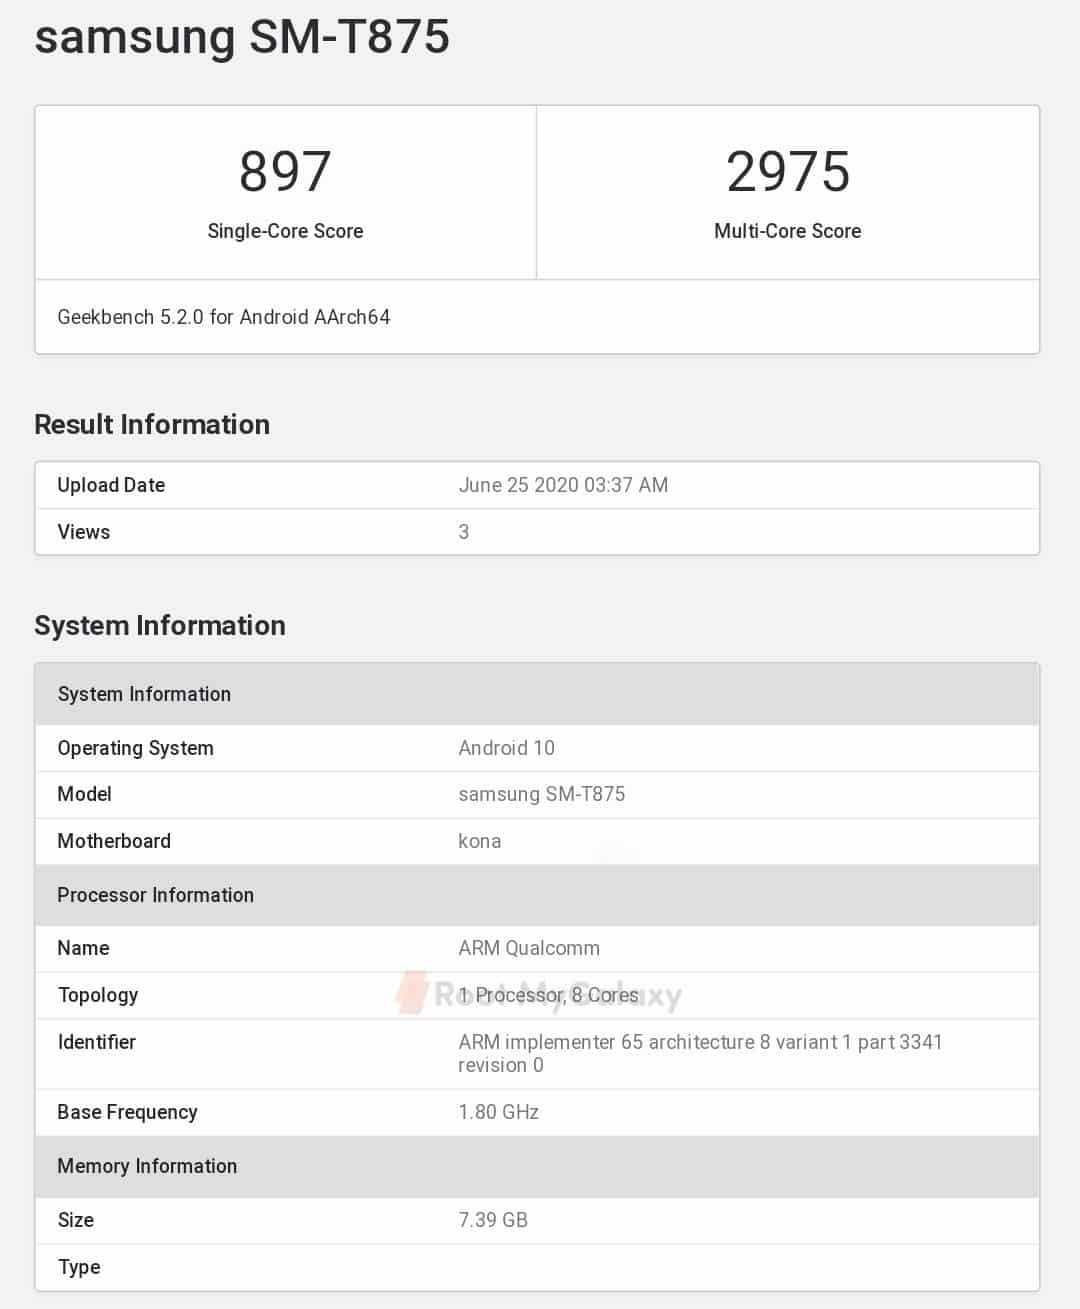 Galaxy Tab S7 5G with 8Gb Of RAM and Snapdragon 865 Processer spotted on Geekbench